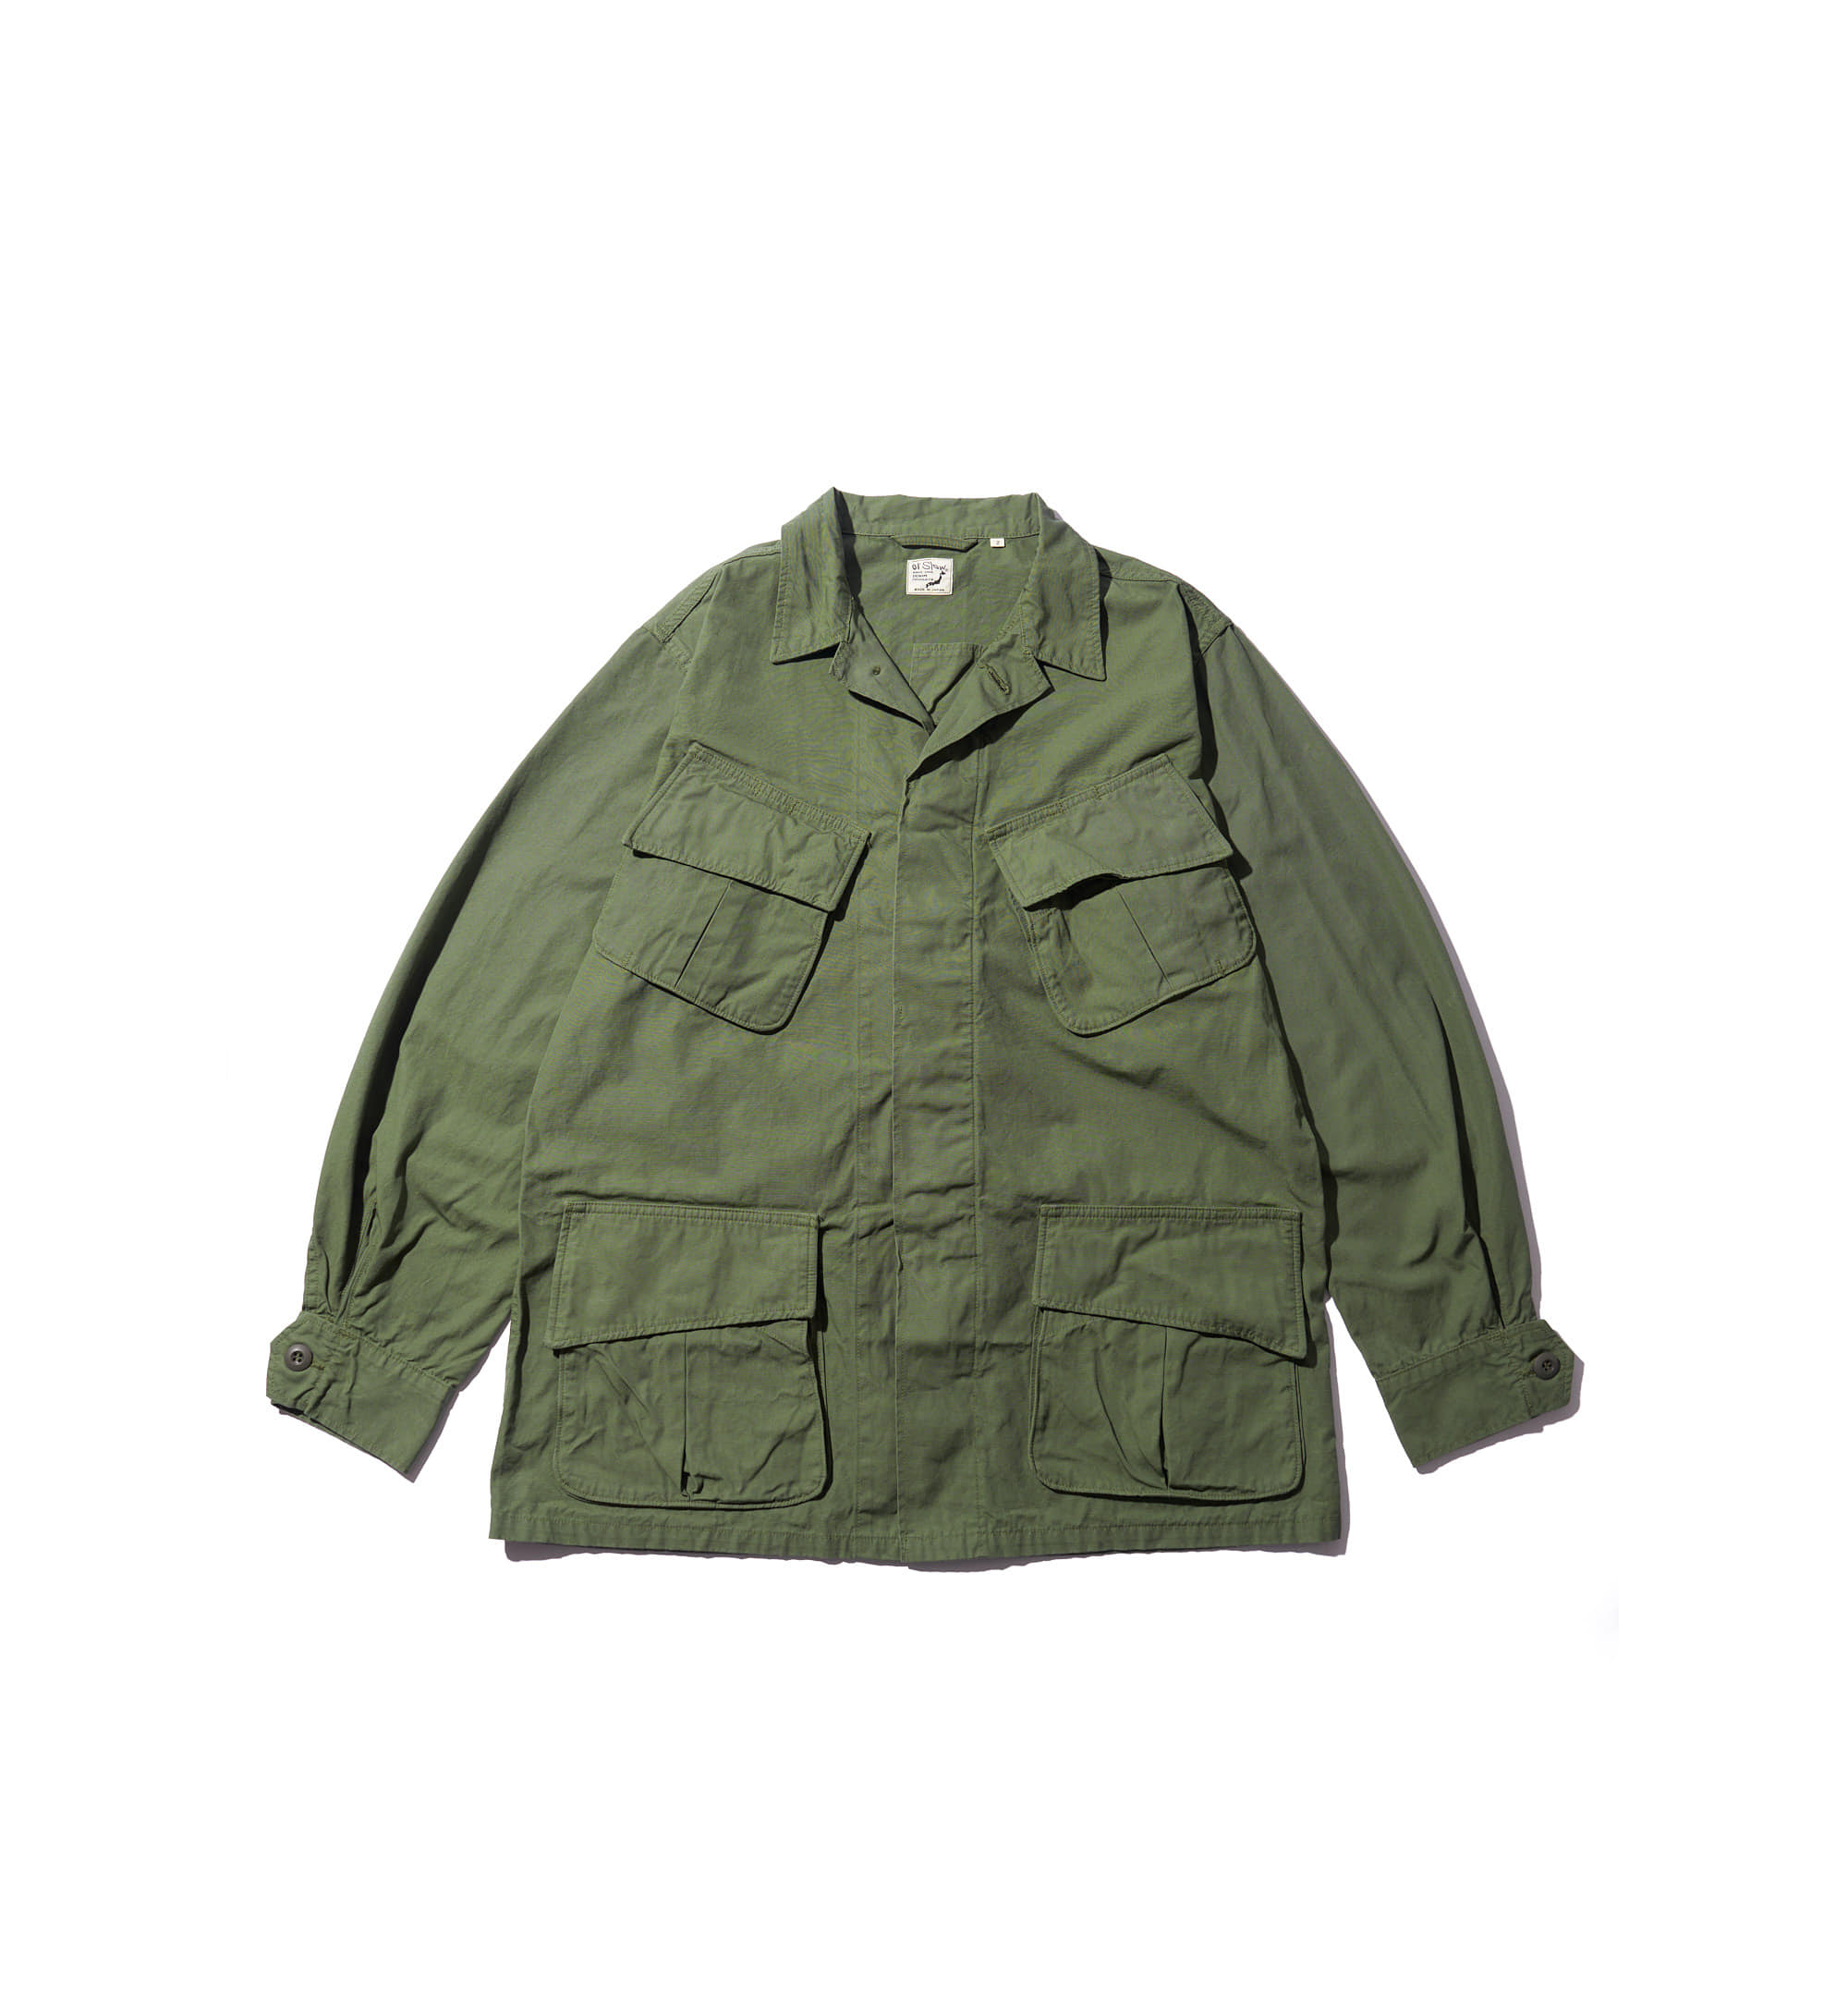 US Army Tropical Jacket Non Ripstop